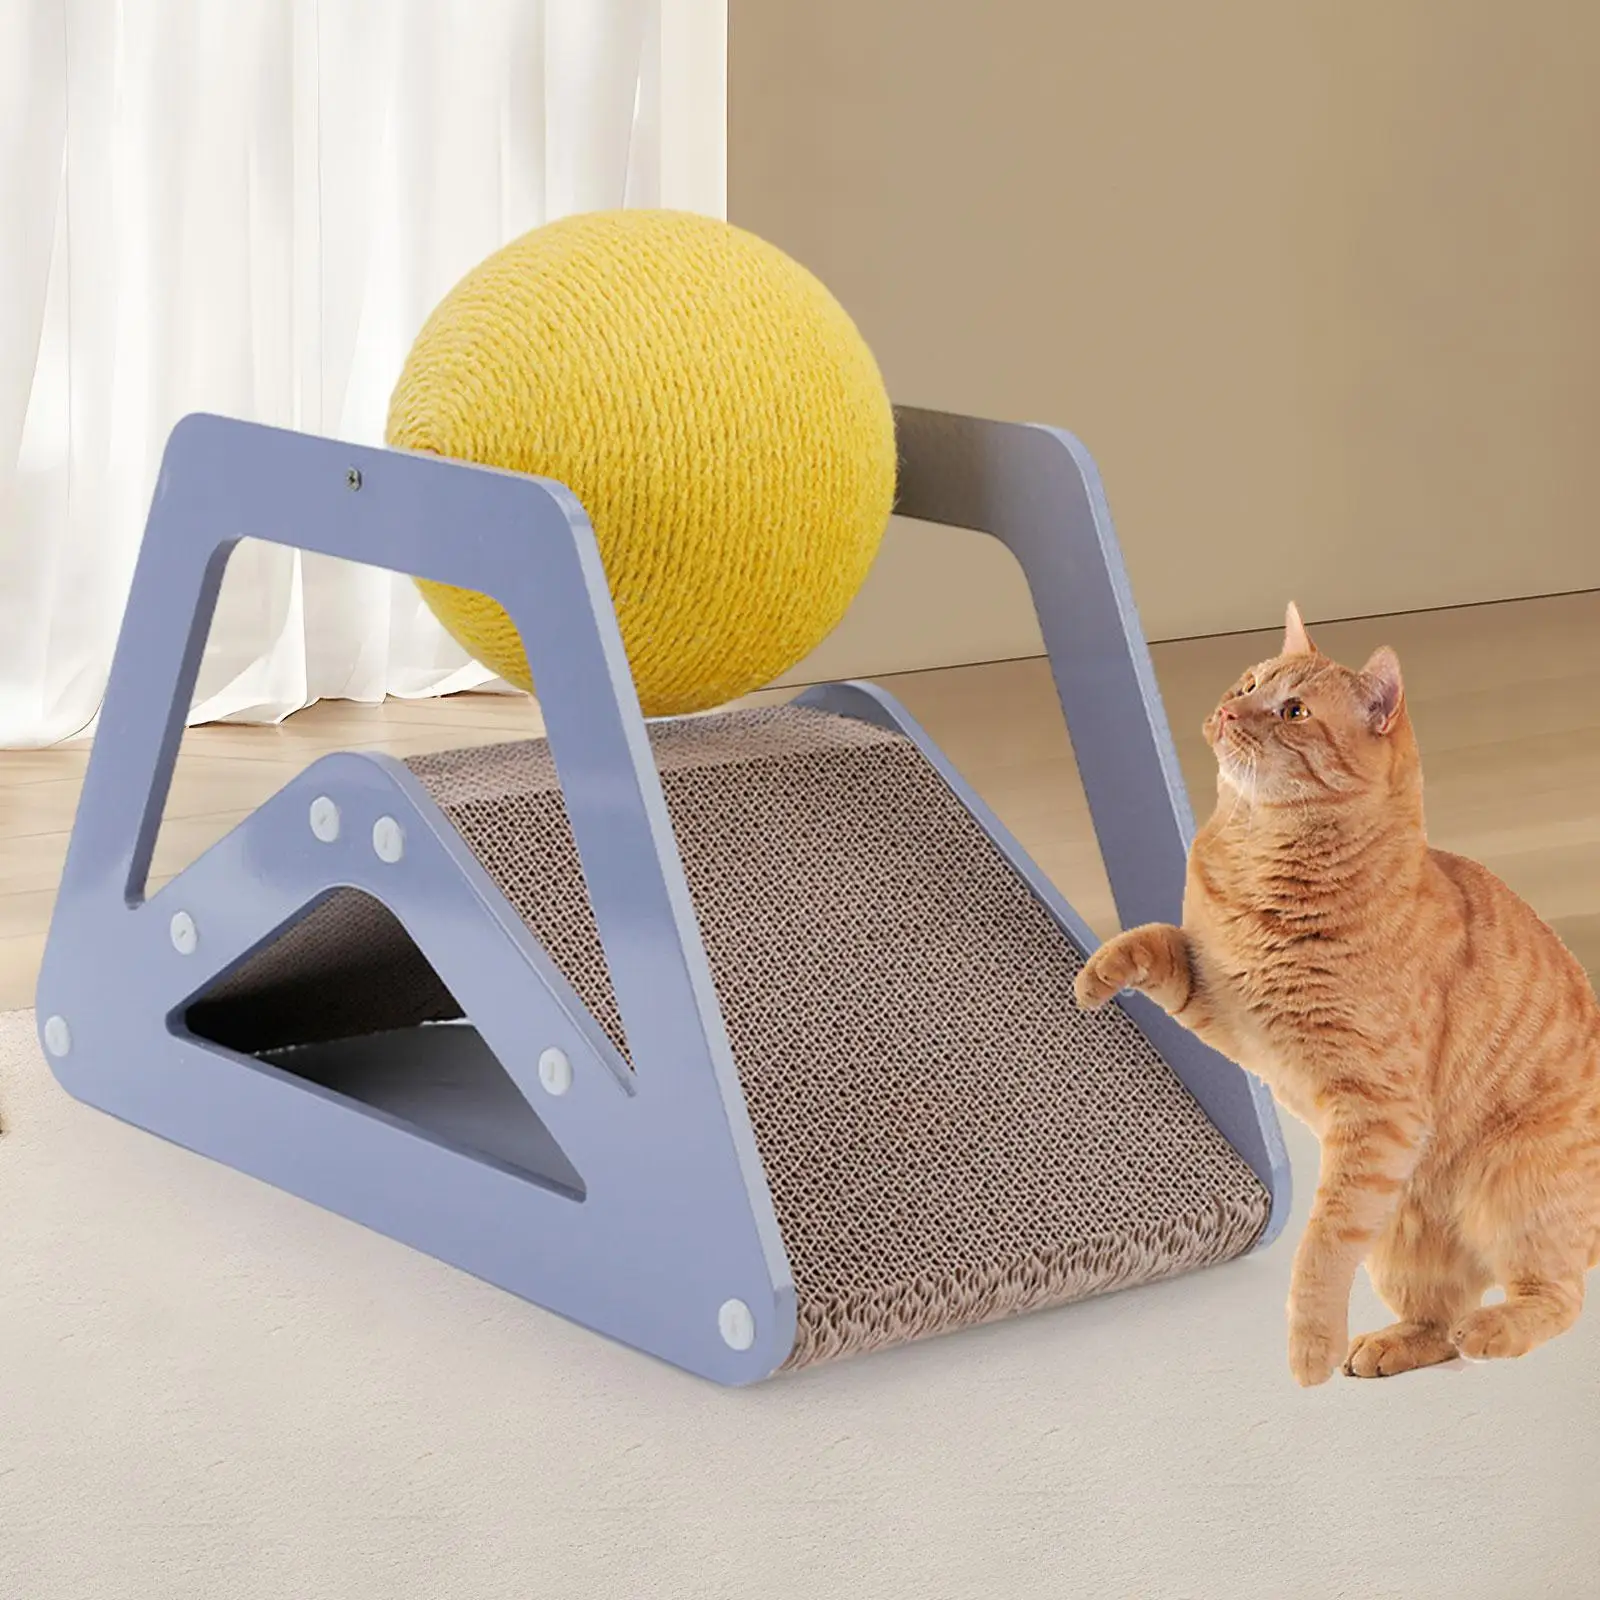 Sisal Cat Scratching Ball Cat Scratcher Cardboard Corrugated Paper for Indoor Cats Kitty Playing Rest Small Medium Large Cats